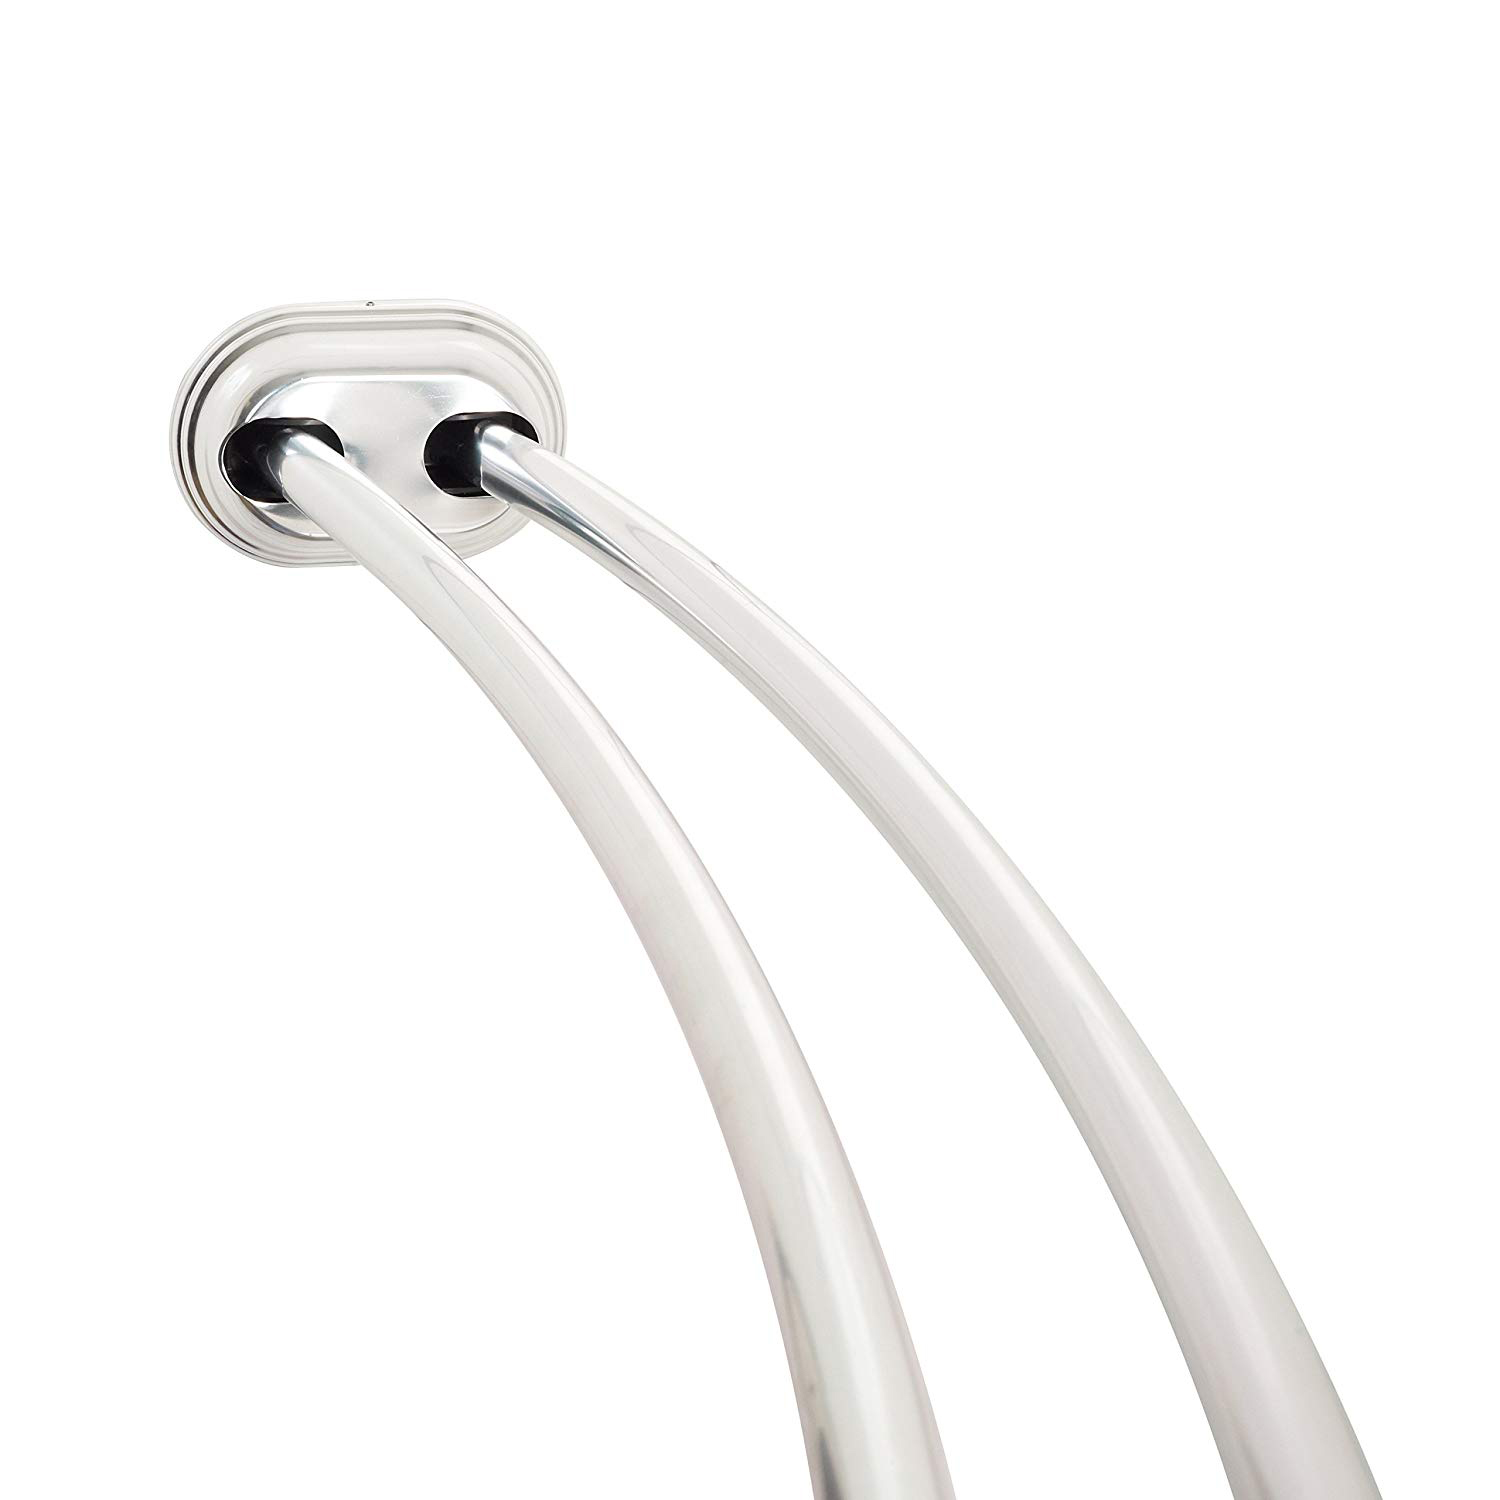 NeverRust 50-72" Double Tension Curved Shower Rod in Chrome